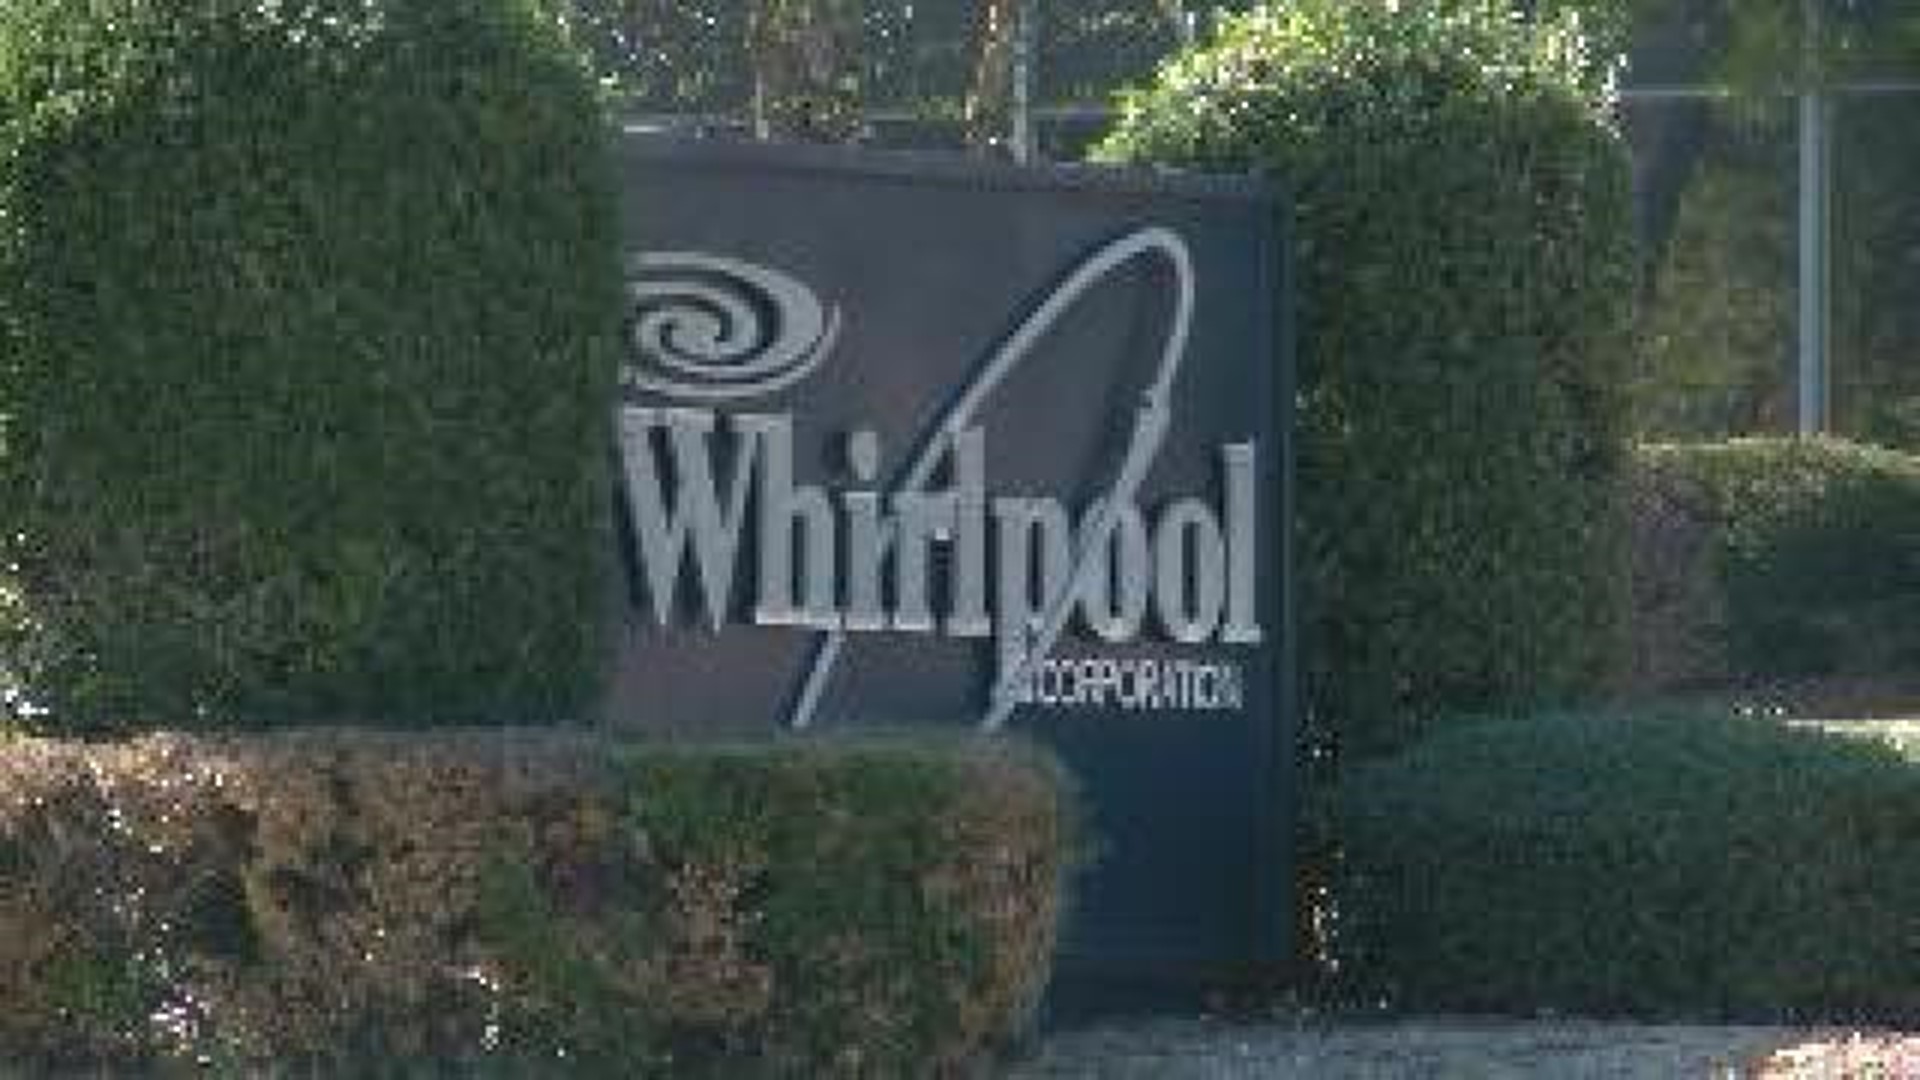 Logistics Company to Lease Whirlpool Property